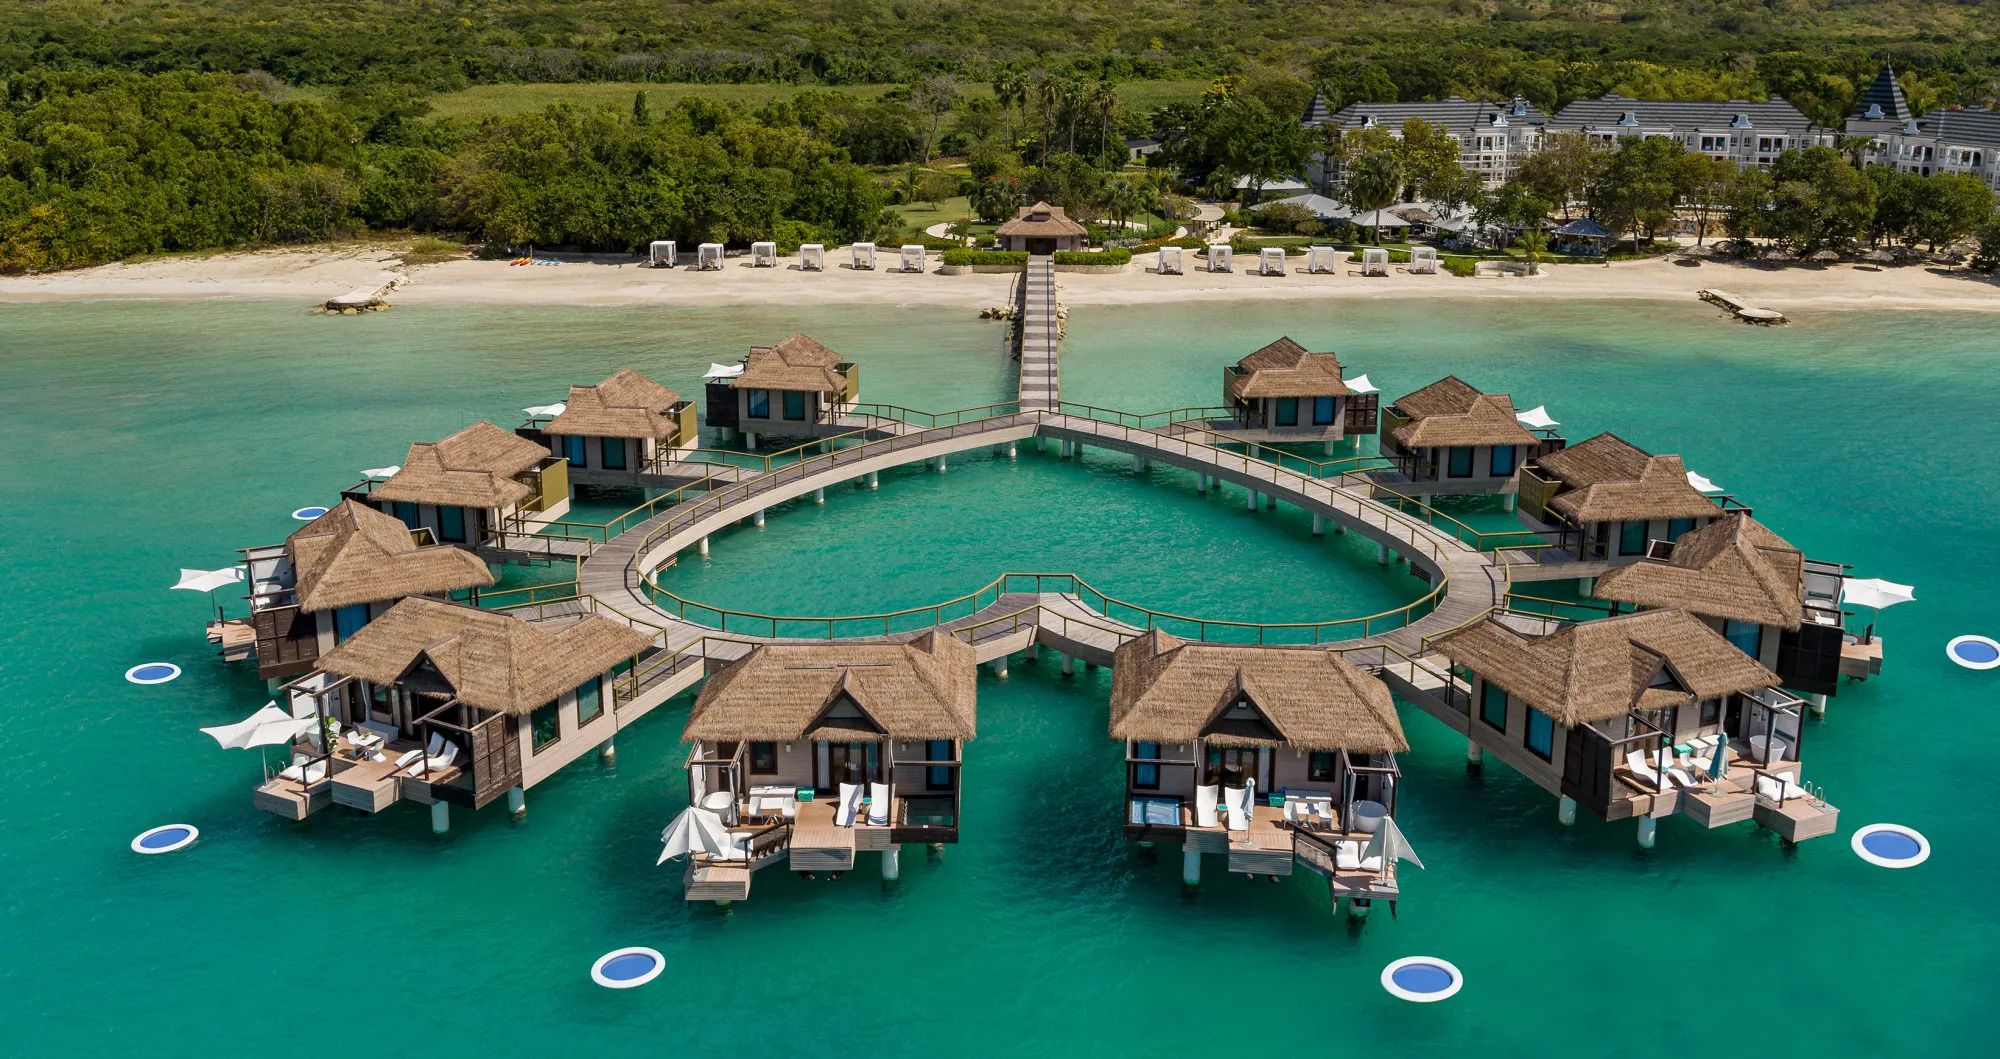 sandals-south-coast-overwater-bungalows-jpg-3